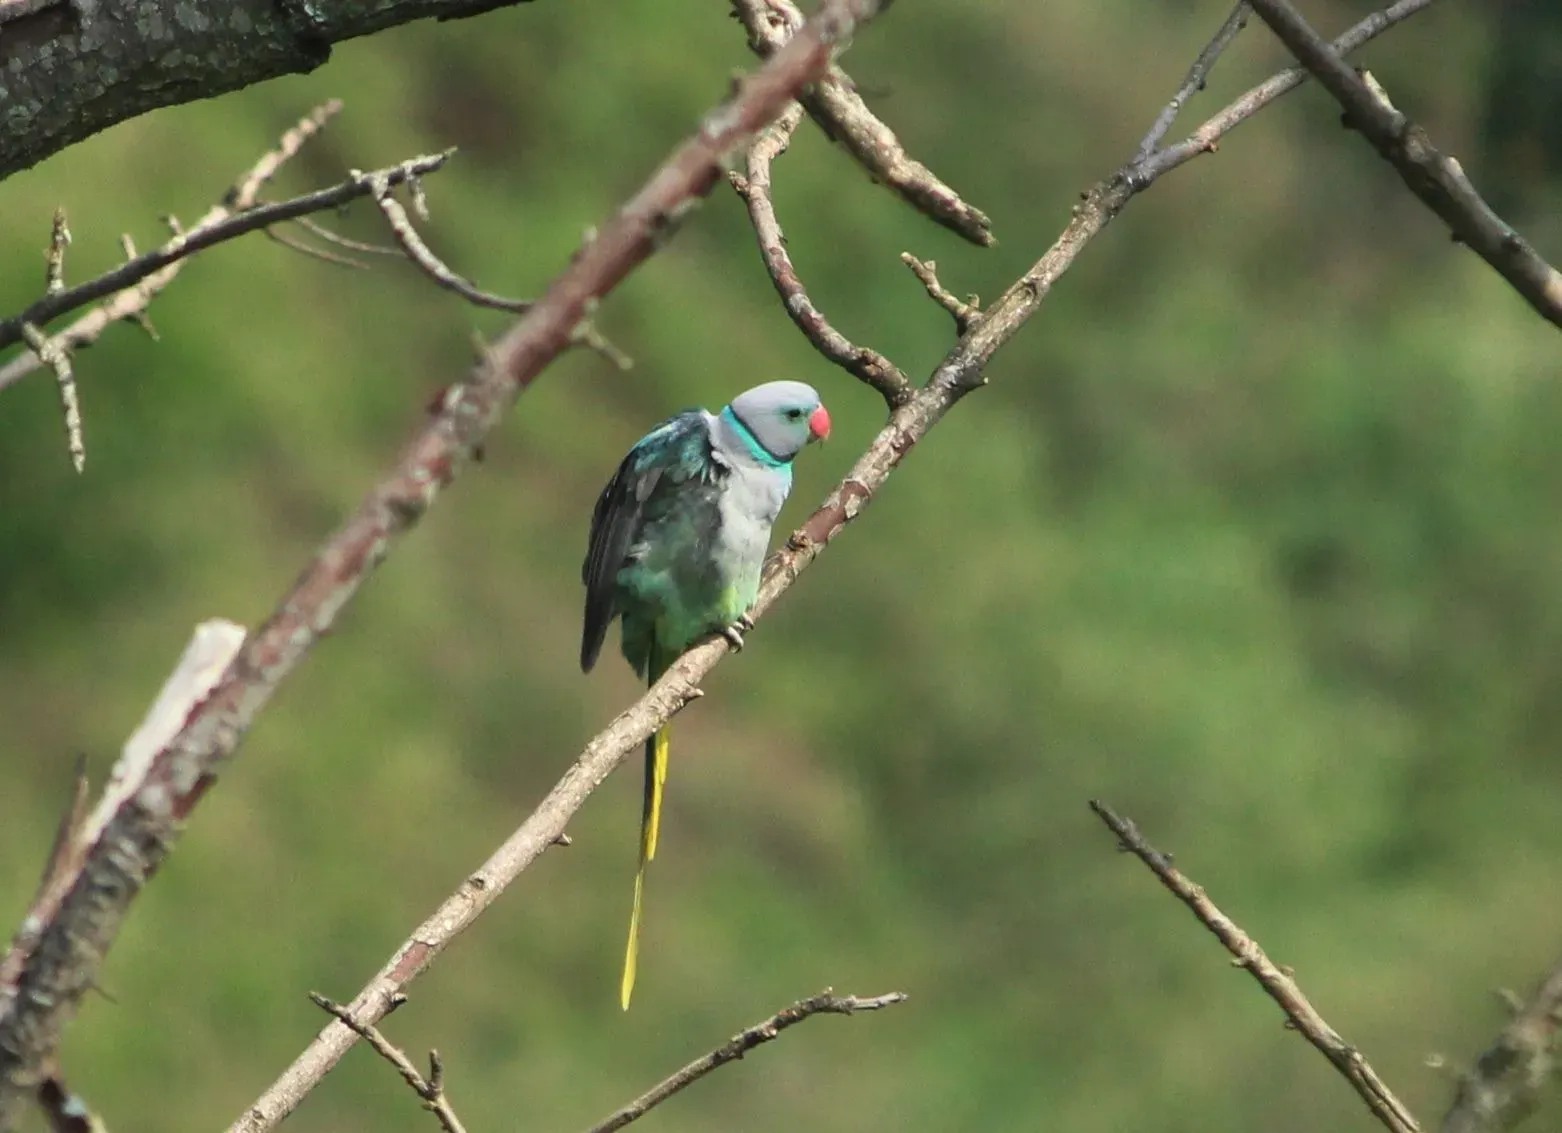 Blue-winged parakeet facts are about South Indian birds.